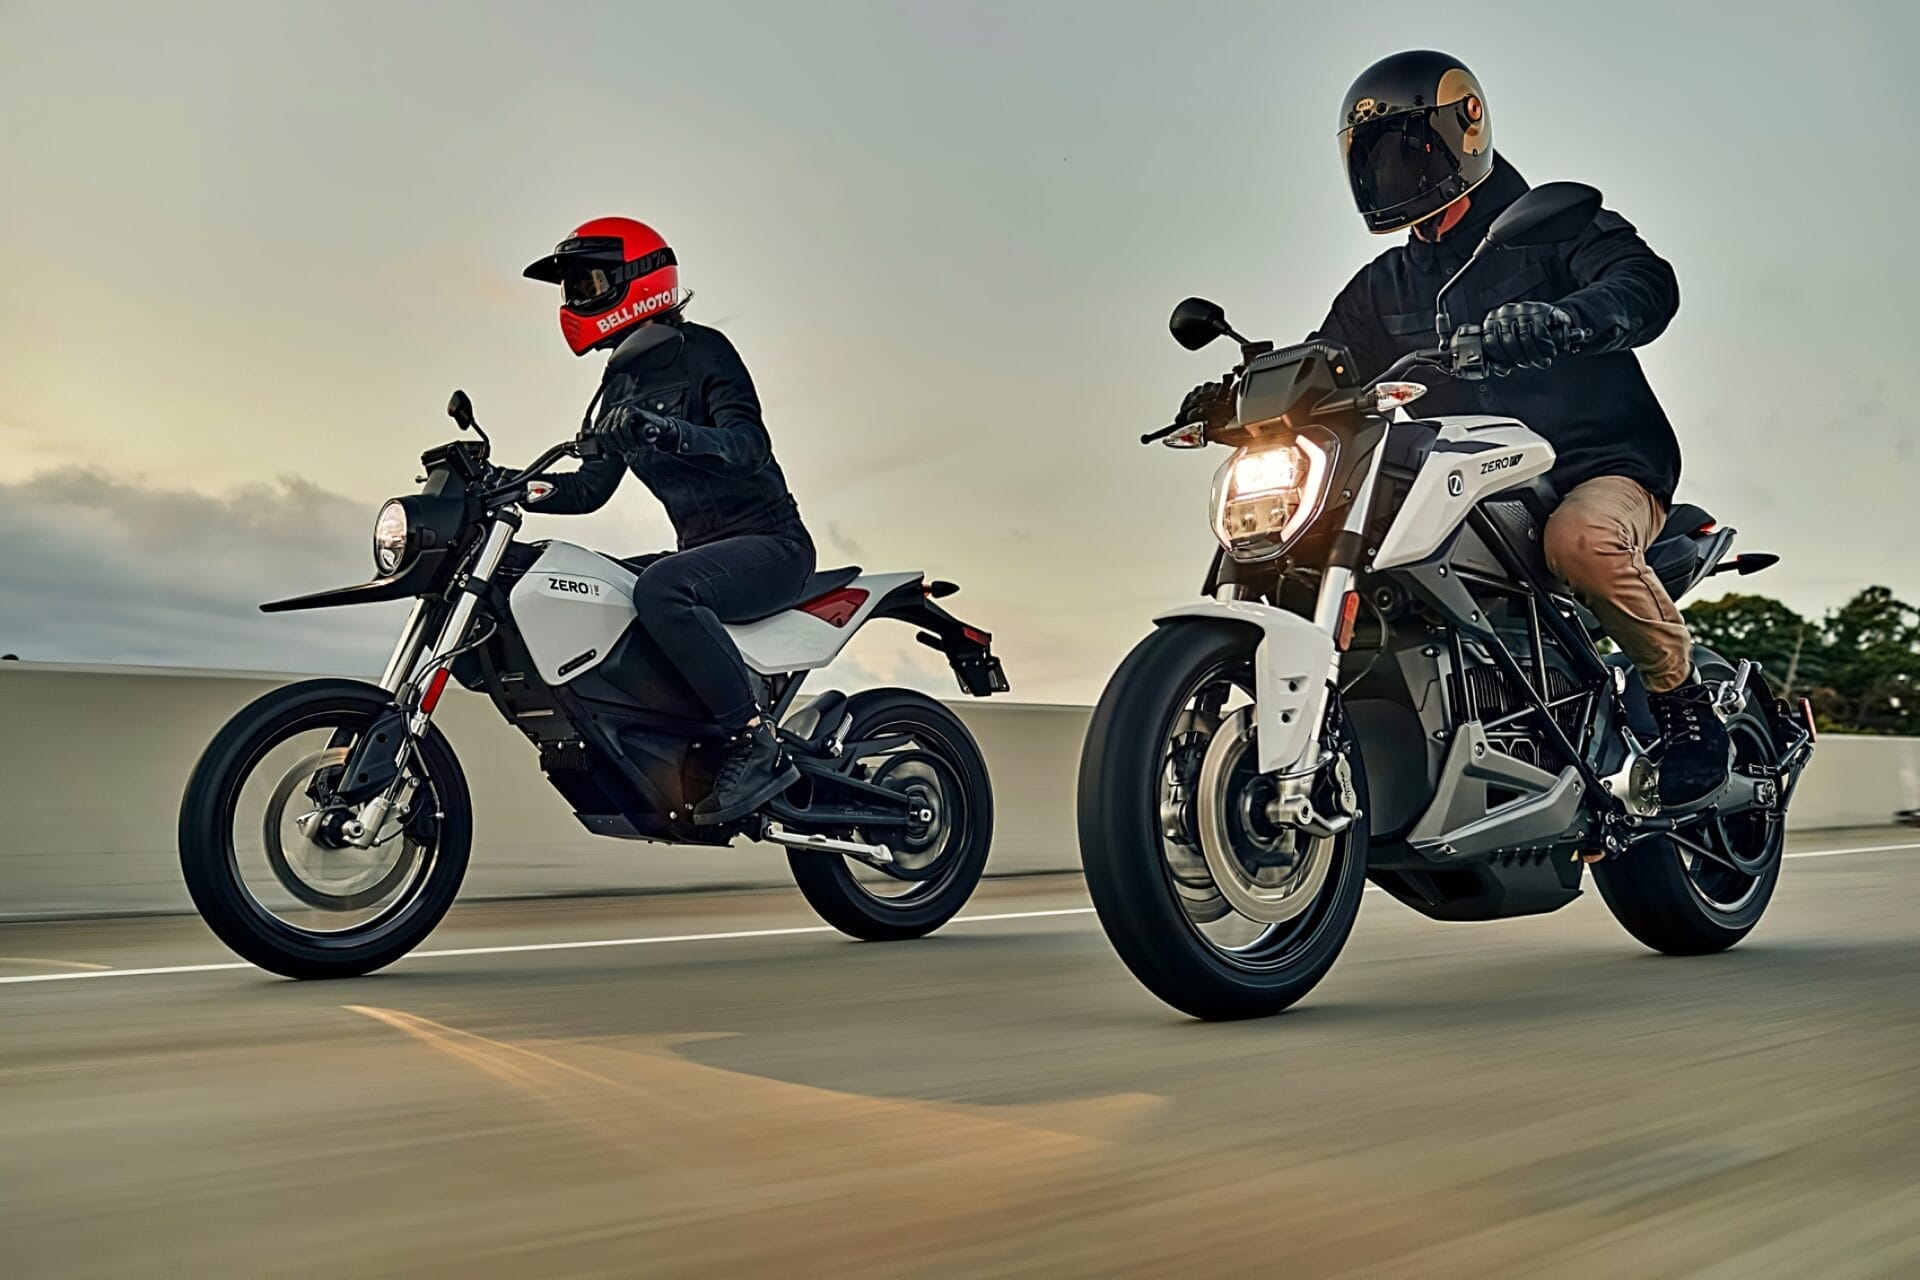 The future of urban mobility? Electric motorcycles from Zero Motorcycles